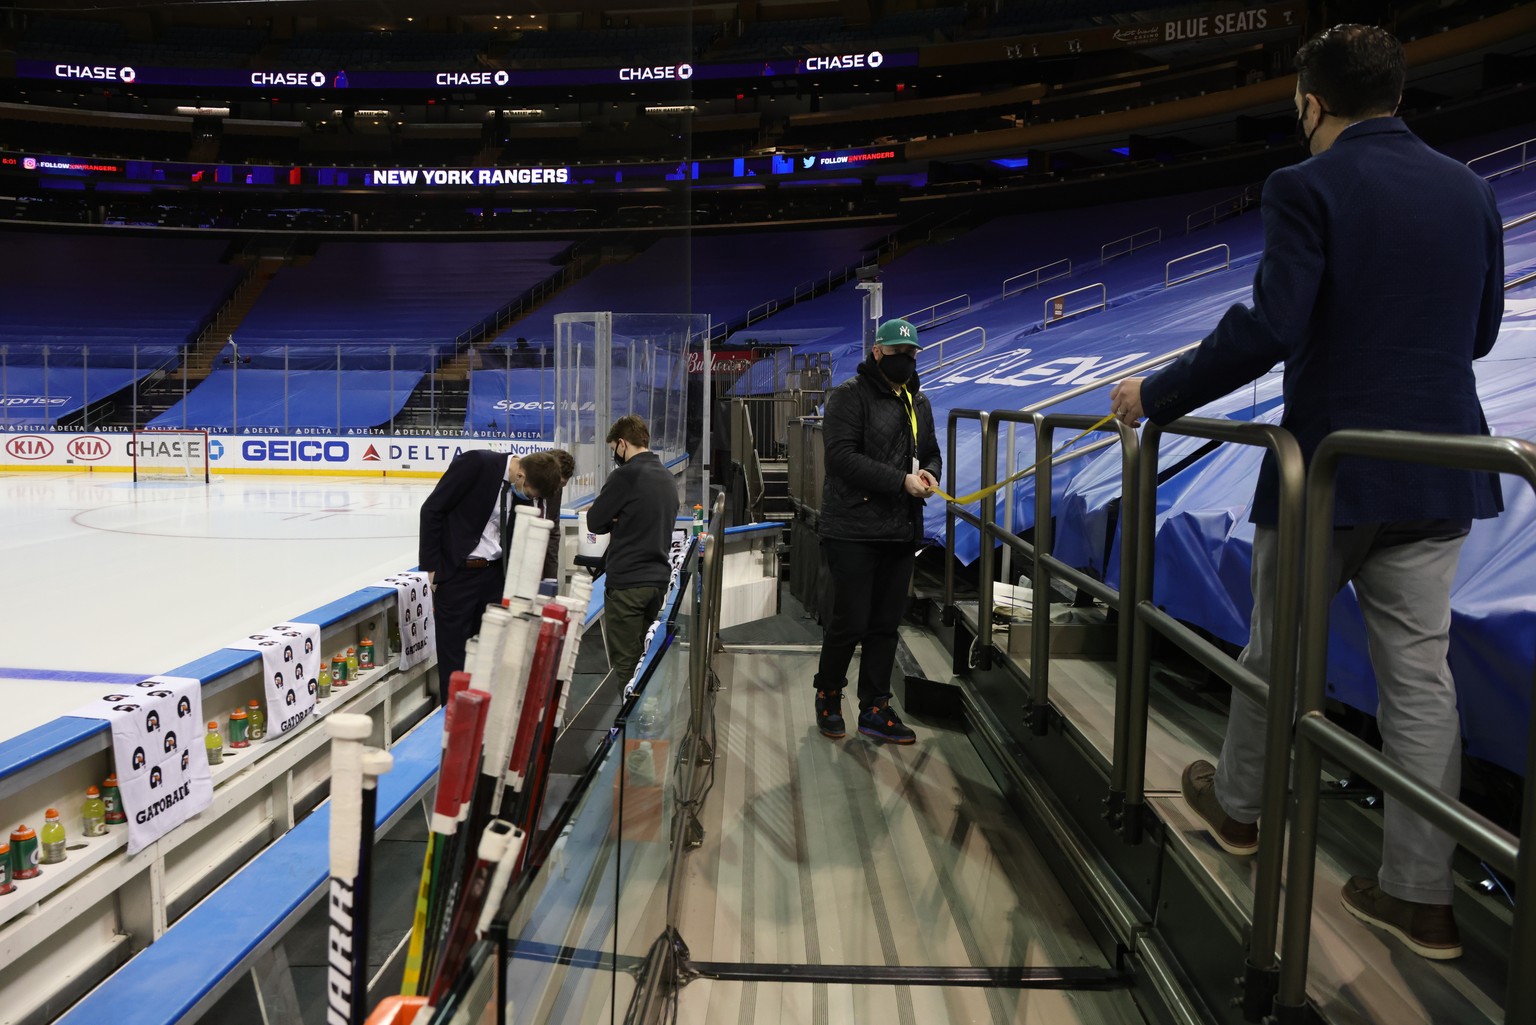 Due to updated COVID-19 protocols, the glass has been removed from behind the team benches as workers take measurements for additional safety methods prior to an NHL hockey game between the Washington ...